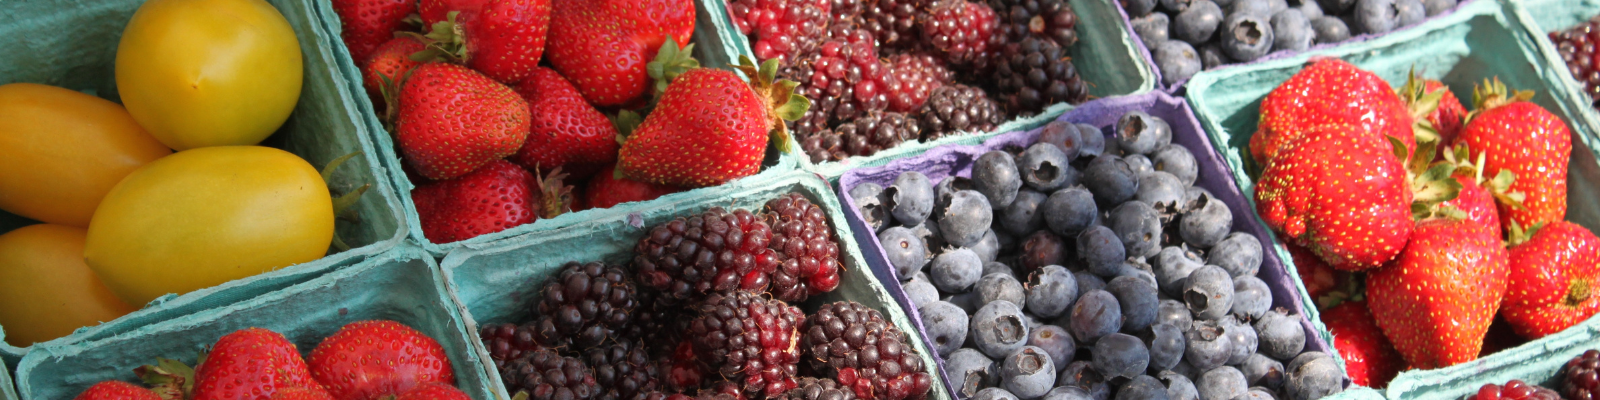 Fruits and berries on a farm stand